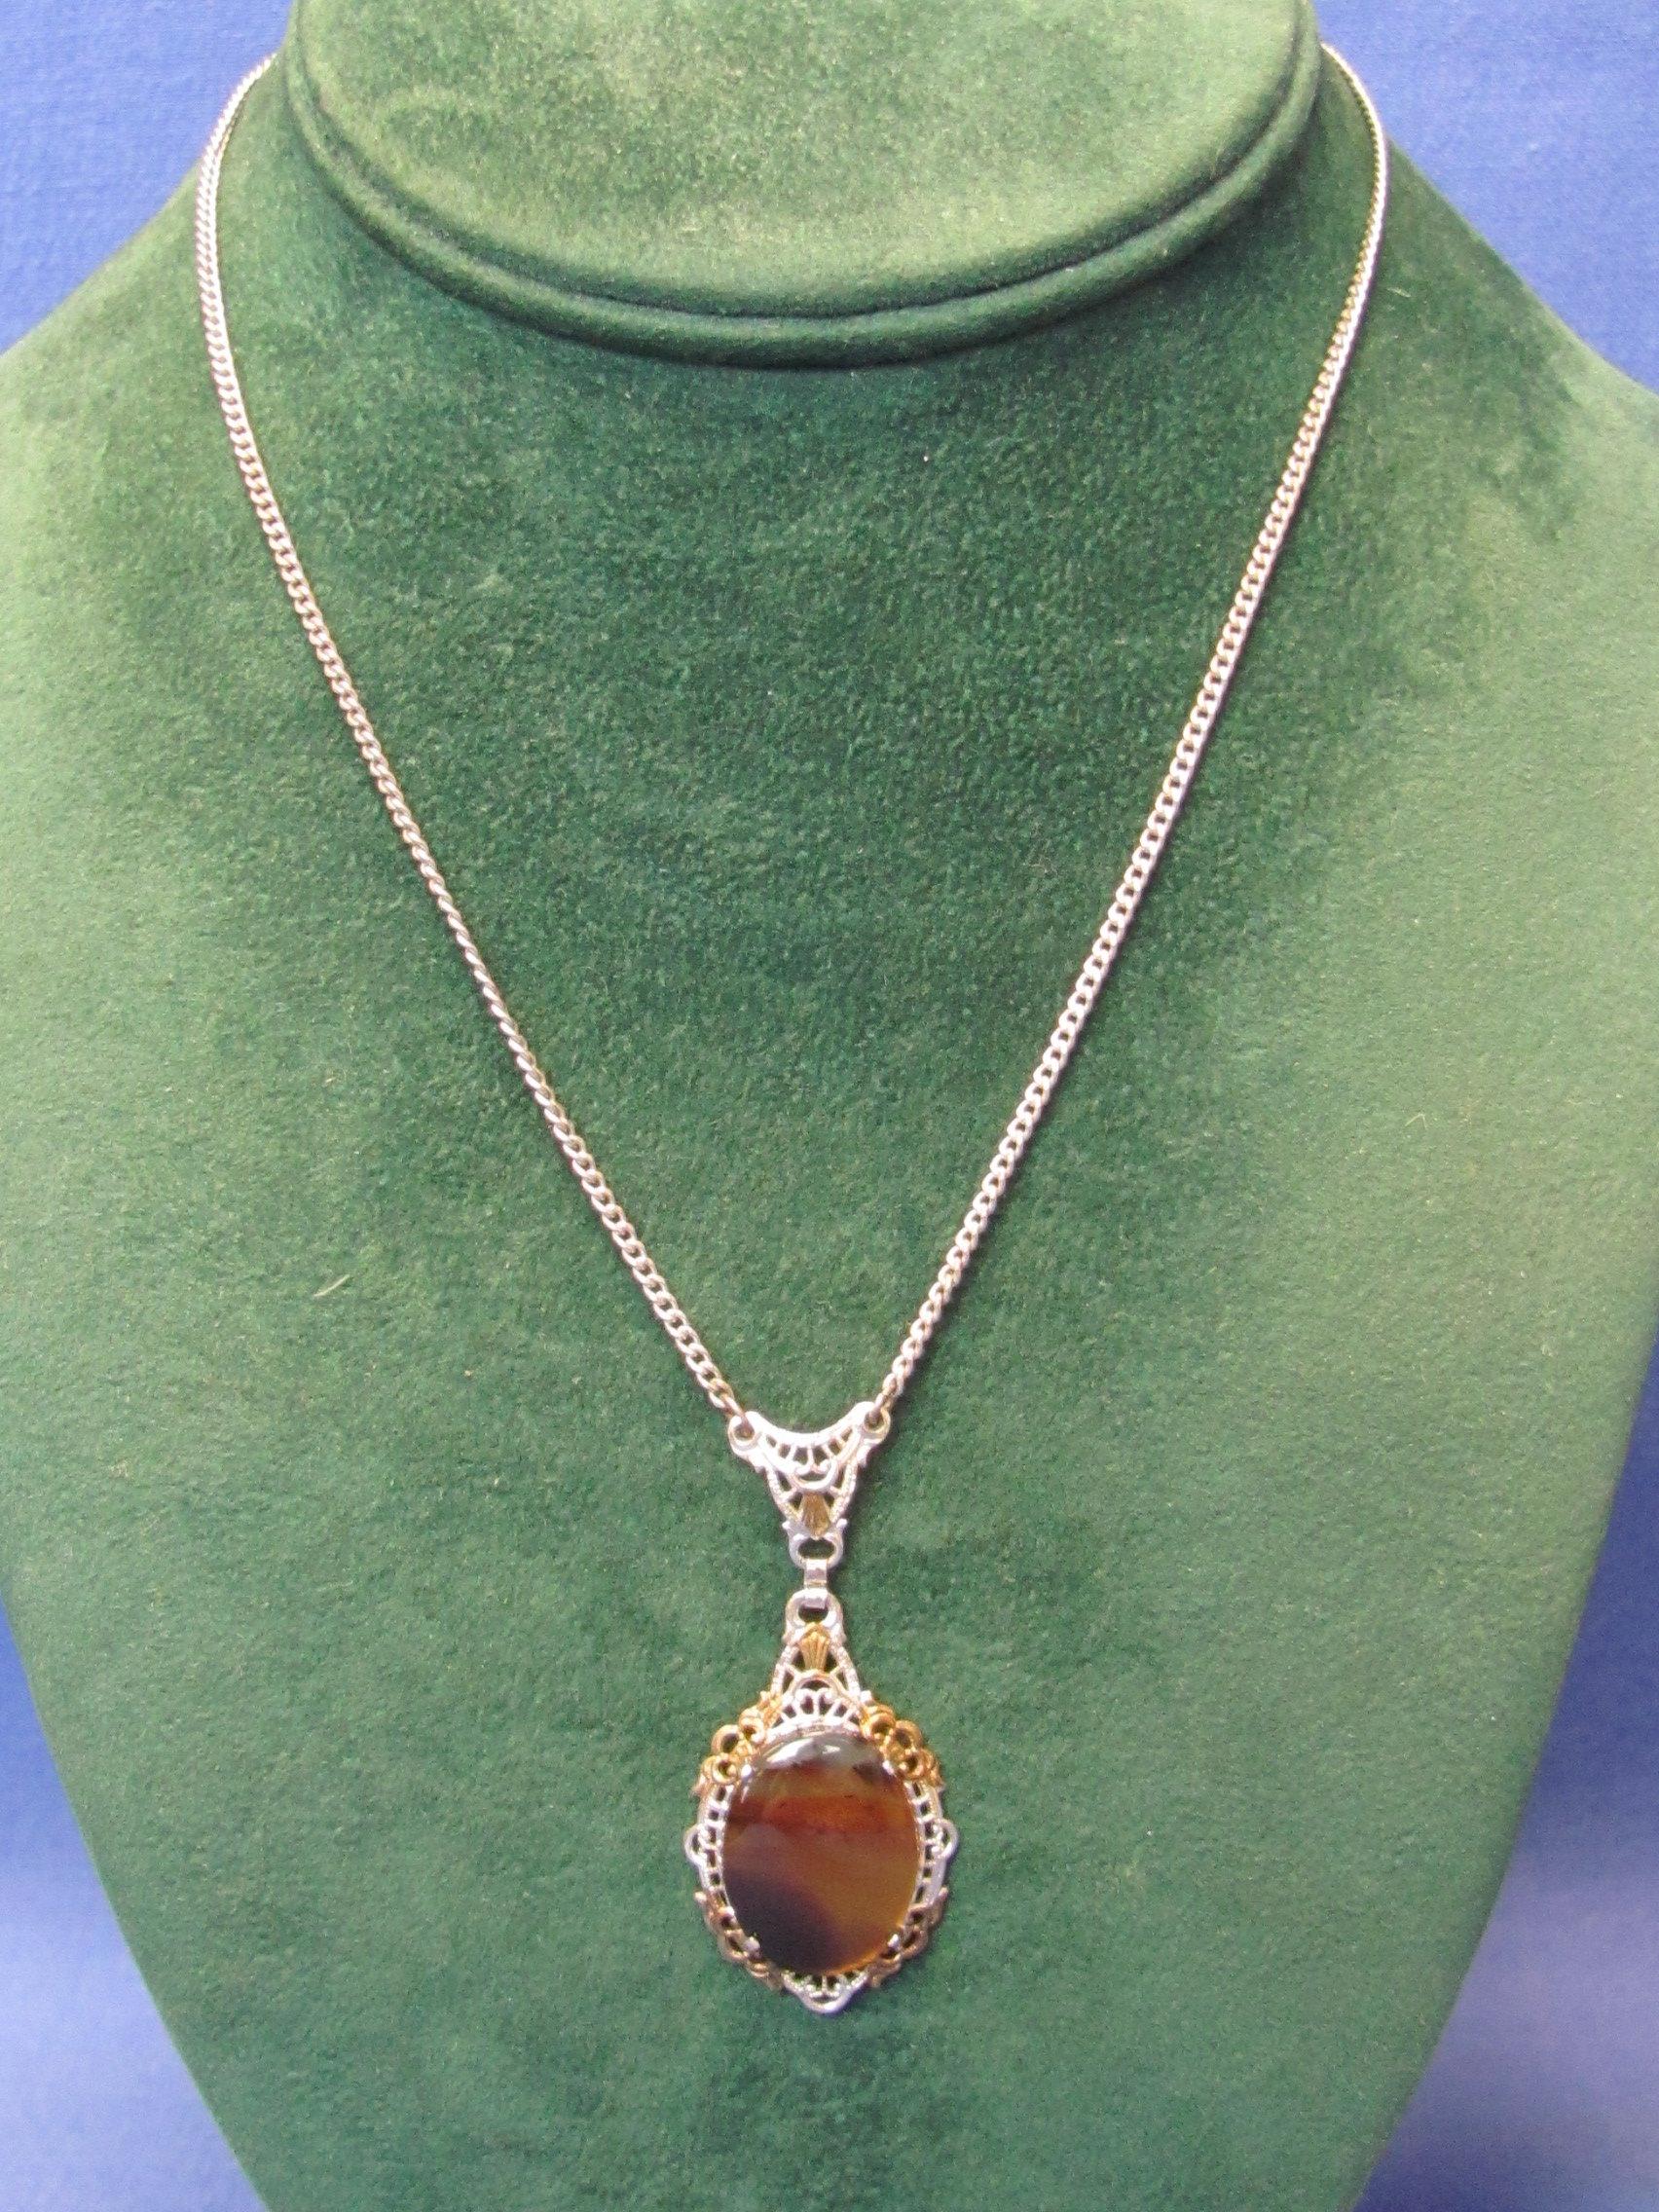 Vintage Sterling Silver Necklace w Brown Glass? Stone – 15” long w 1 3/4” drop – 6.0 grams